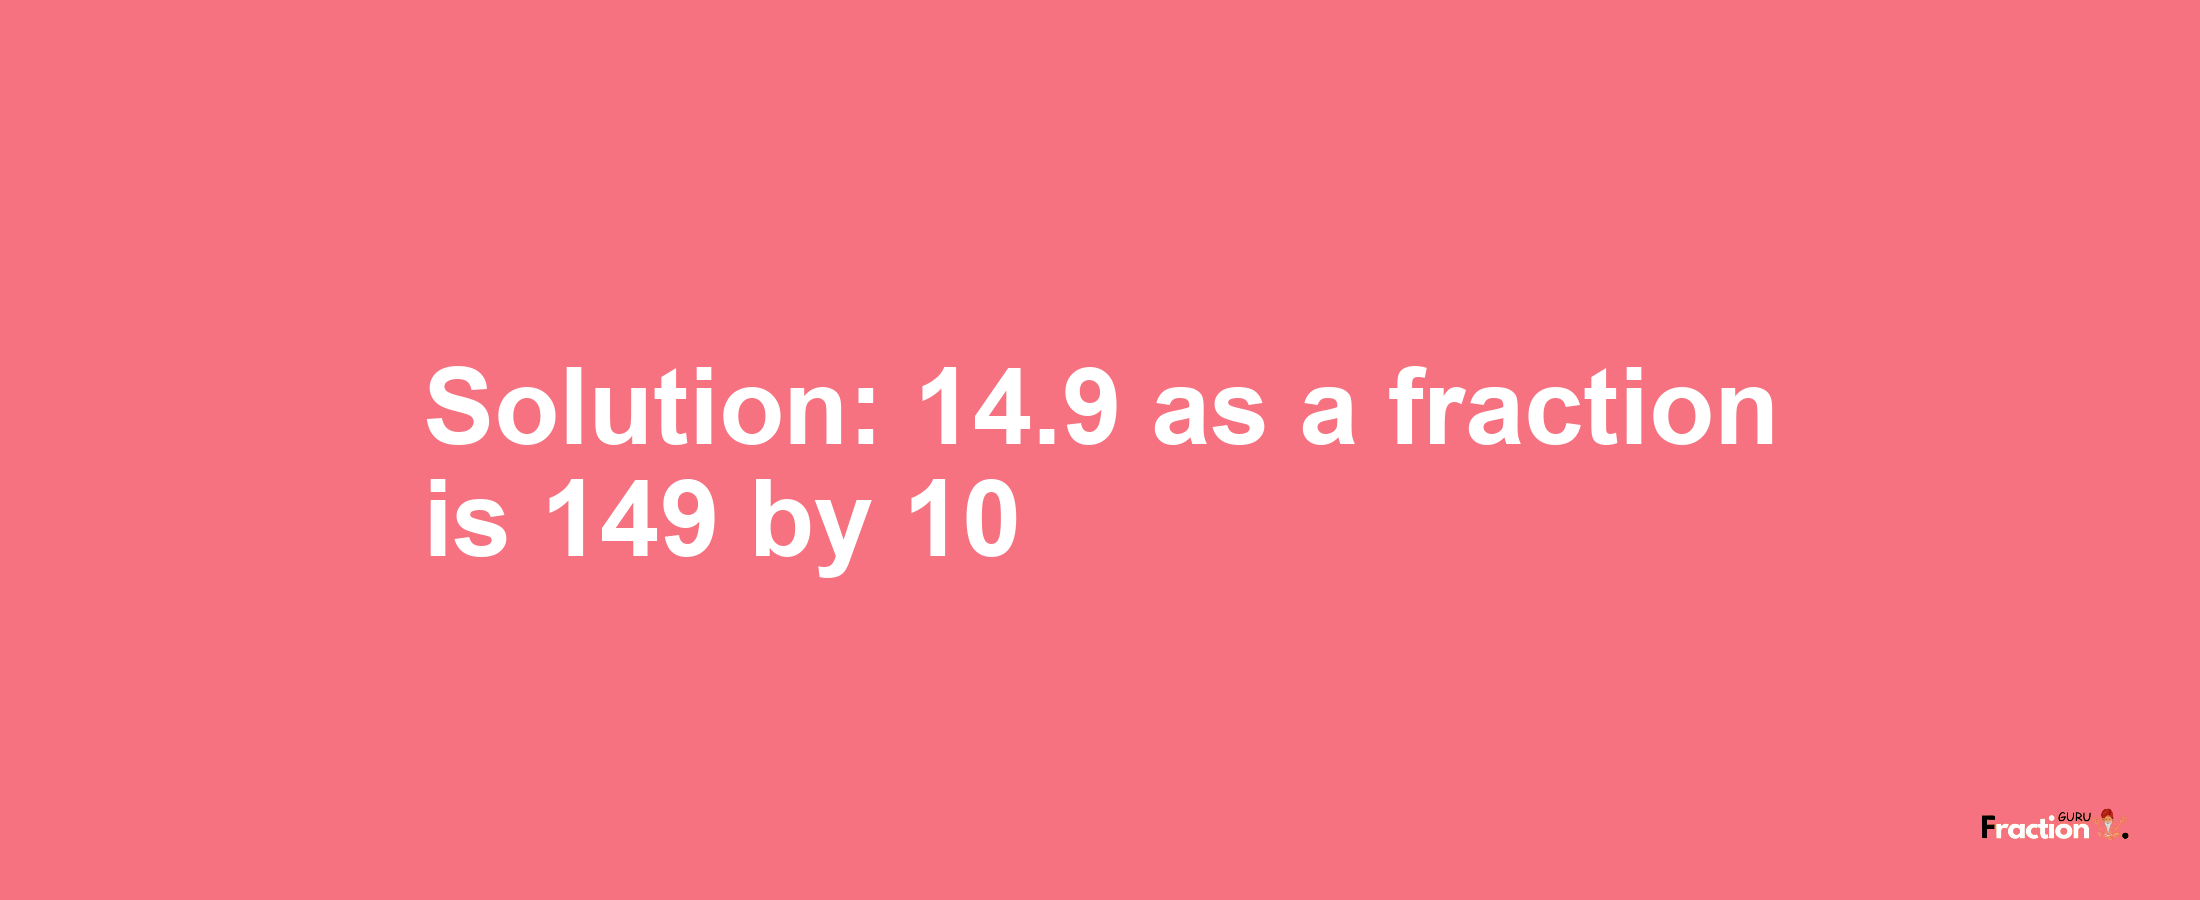 Solution:14.9 as a fraction is 149/10